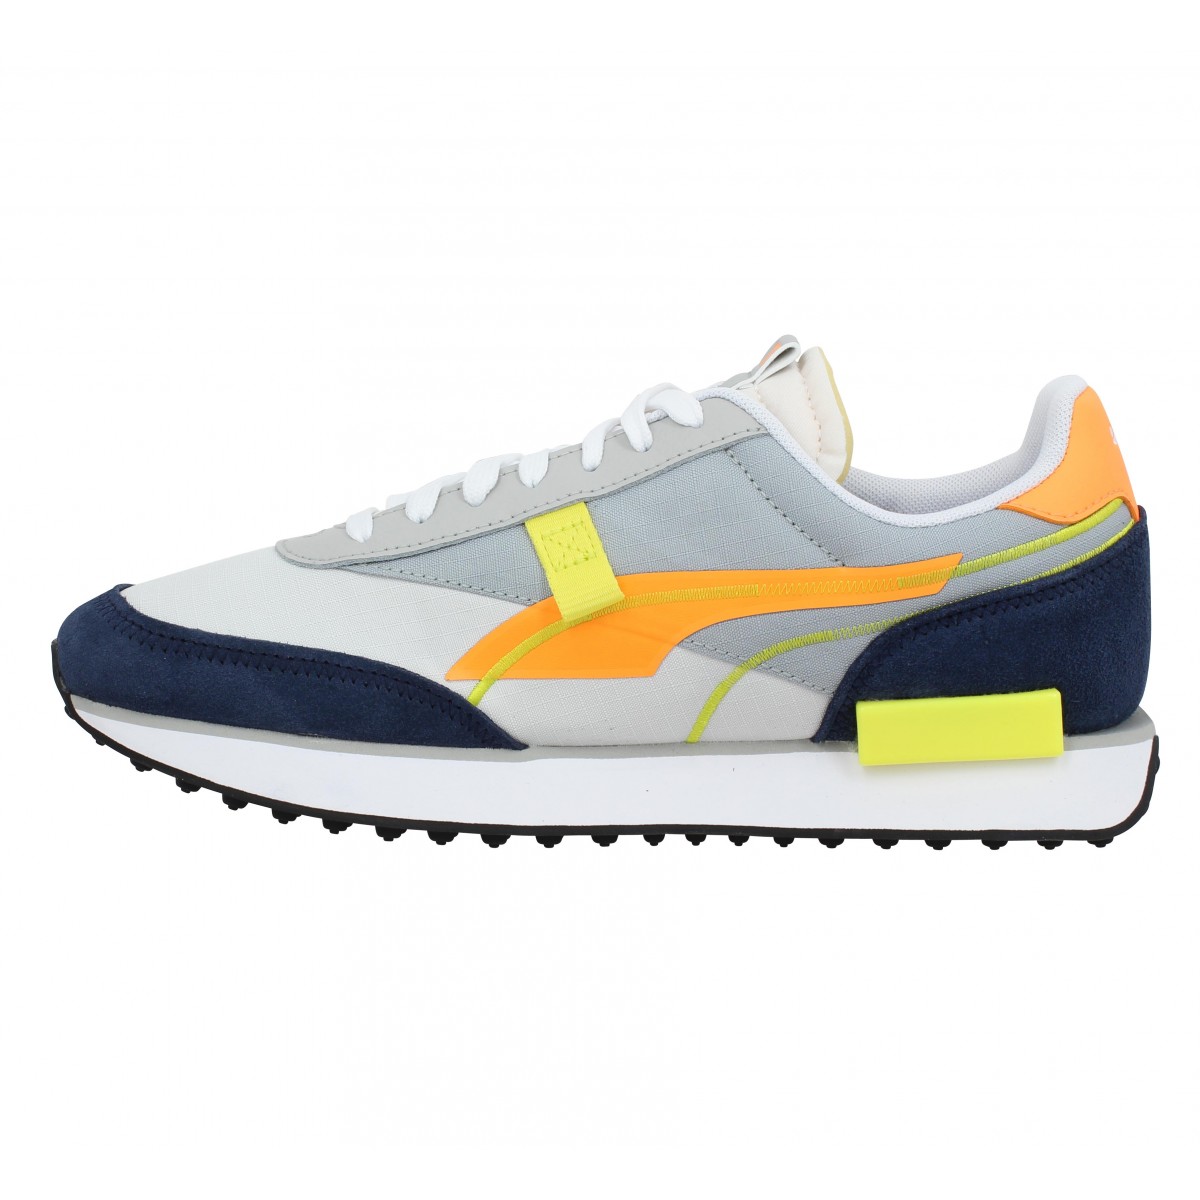 Chaussures Puma Future Rider Twofold Sd Velours Toile Homme Gris Orange Homme Fanny Chaussures